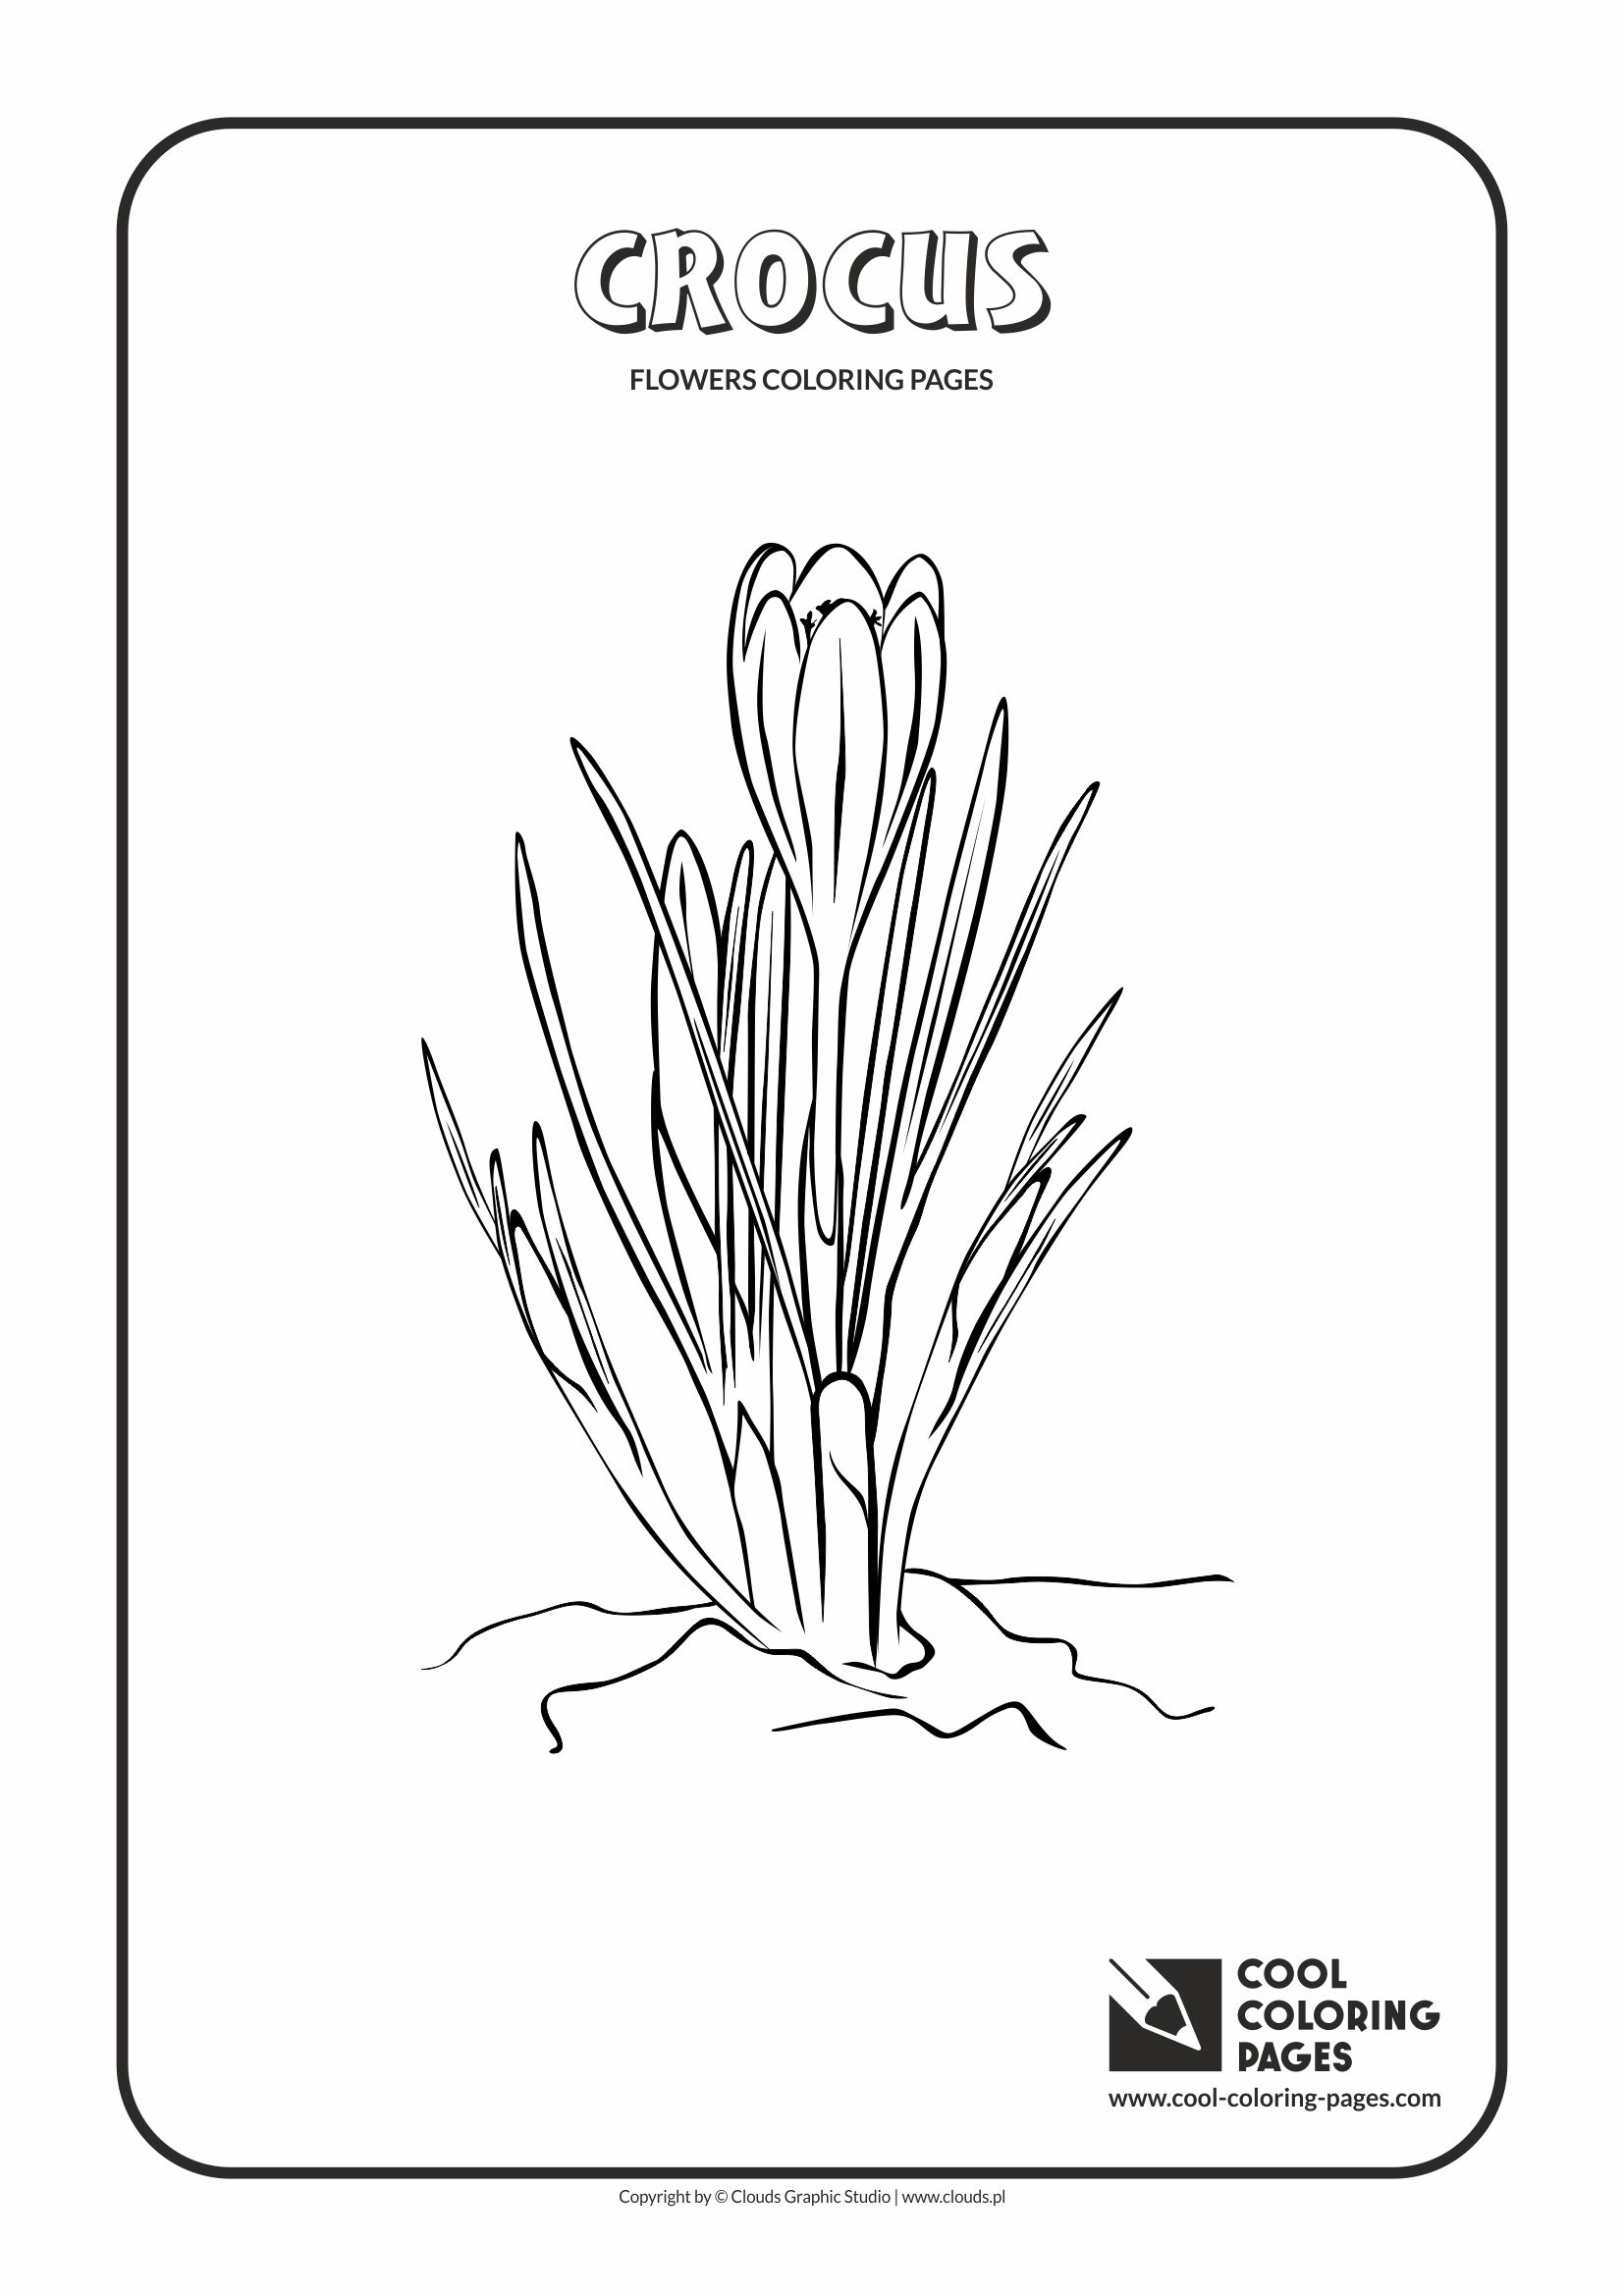 Cool Coloring Pages - Plants / Crocus / Coloring page with crocus